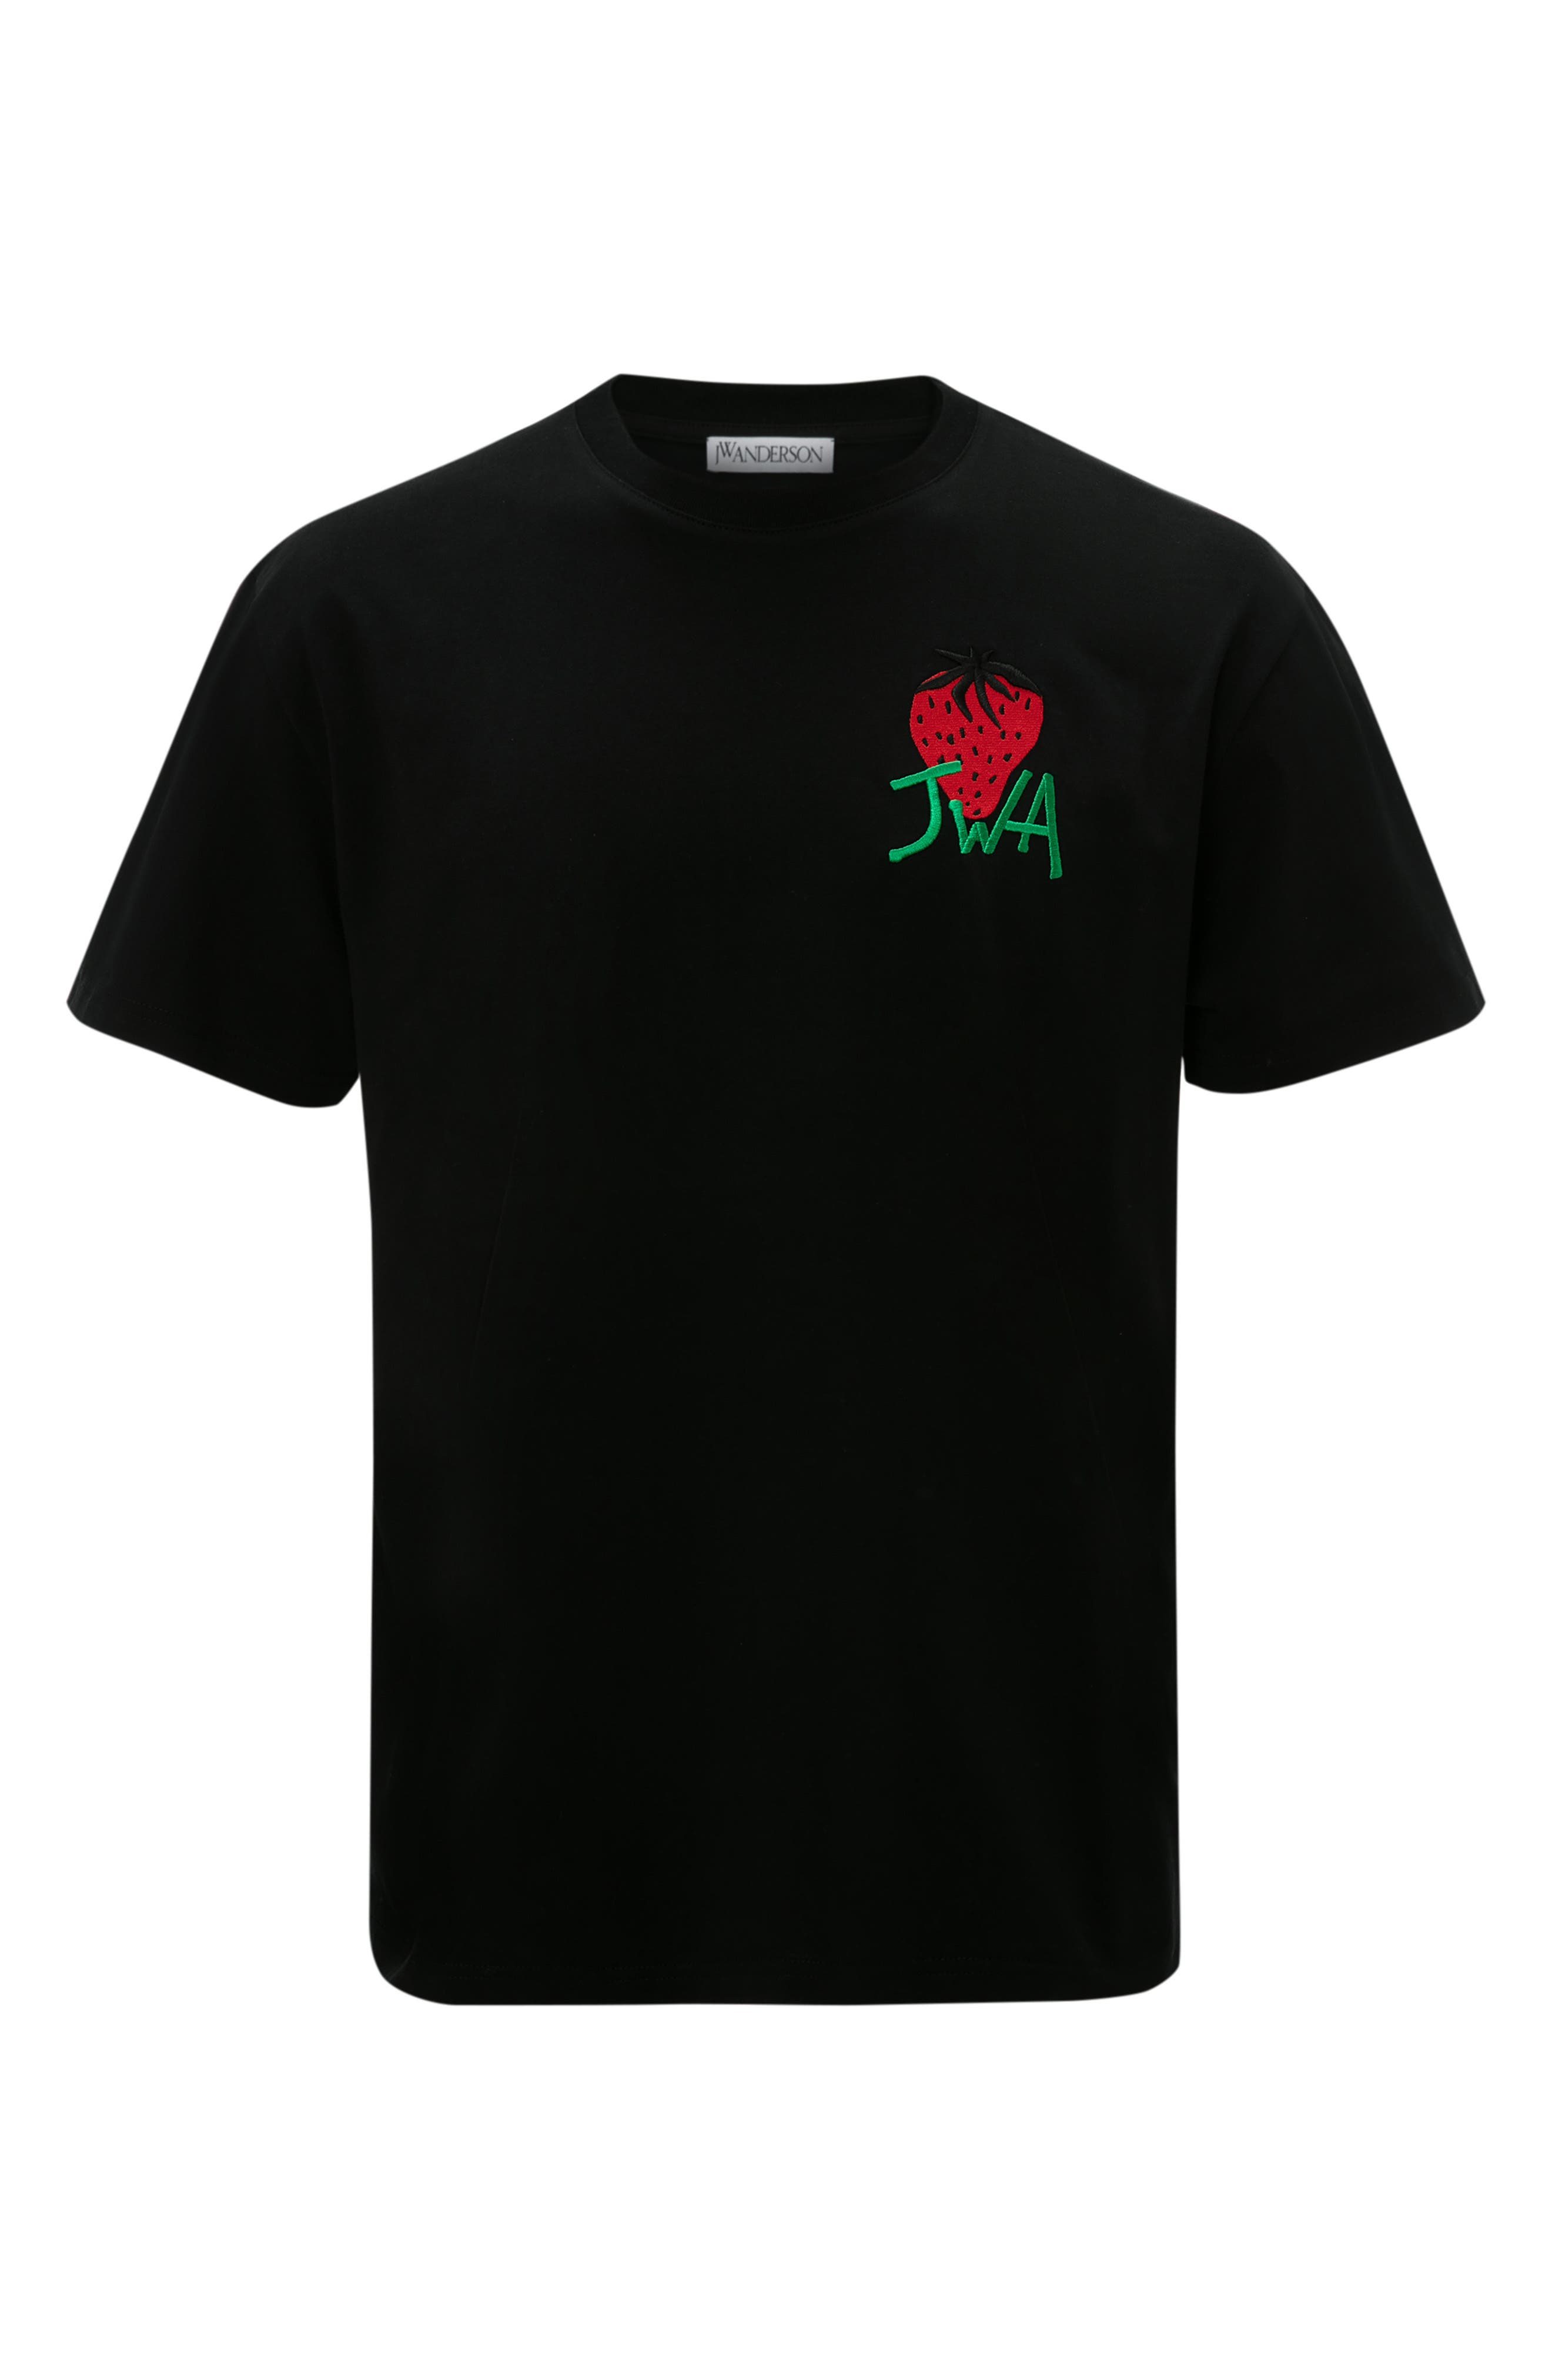 JW Anderson Embroidered Strawberry JWA Logo Cotton T-Shirt in Black at Nordstrom, Size Medium